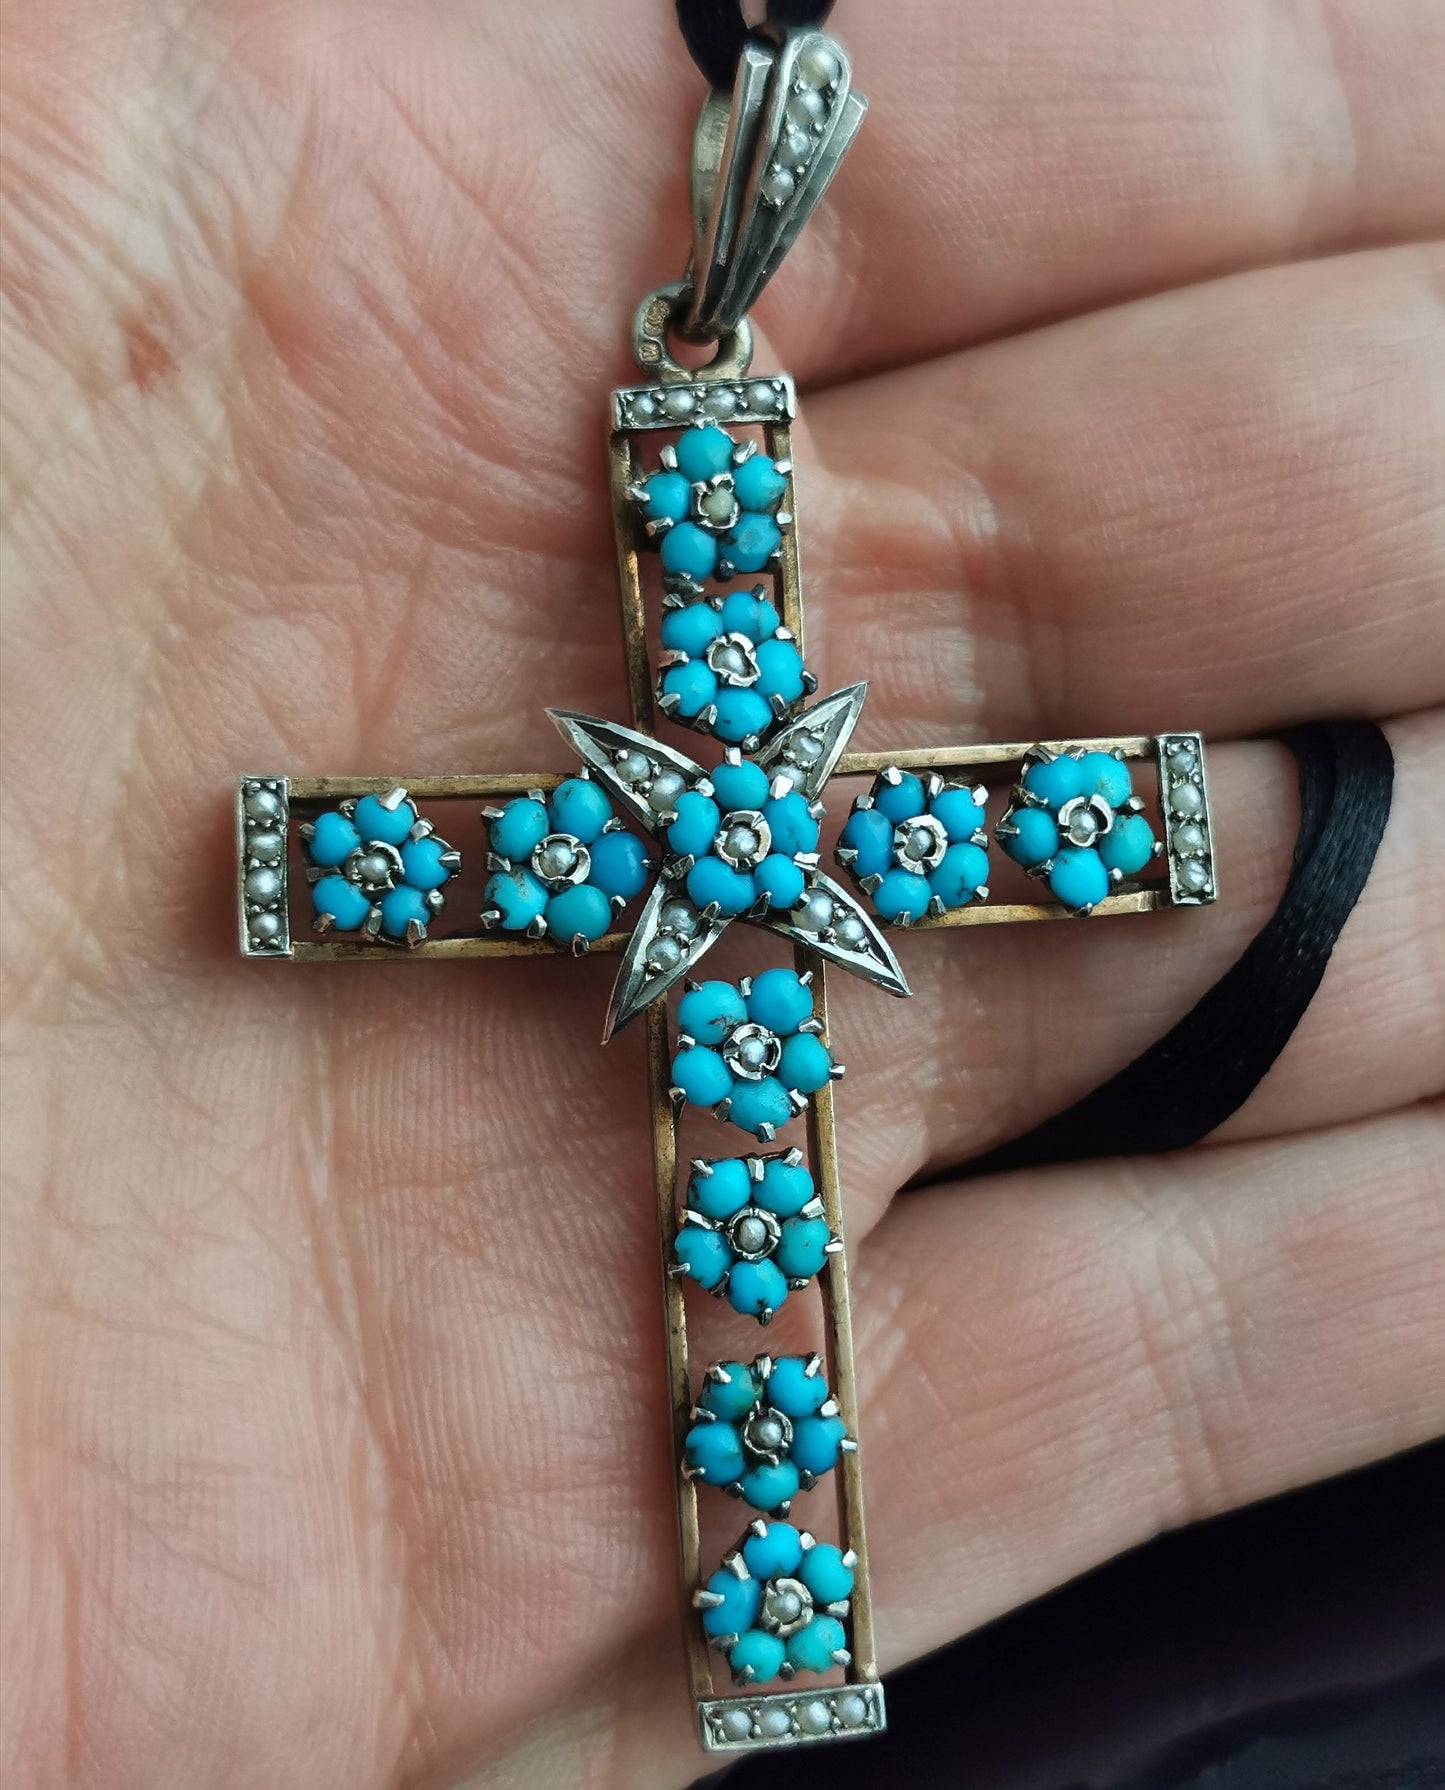 Antique Austro Hungarian Cross pendant, Turquoise, Silver and seed pearl